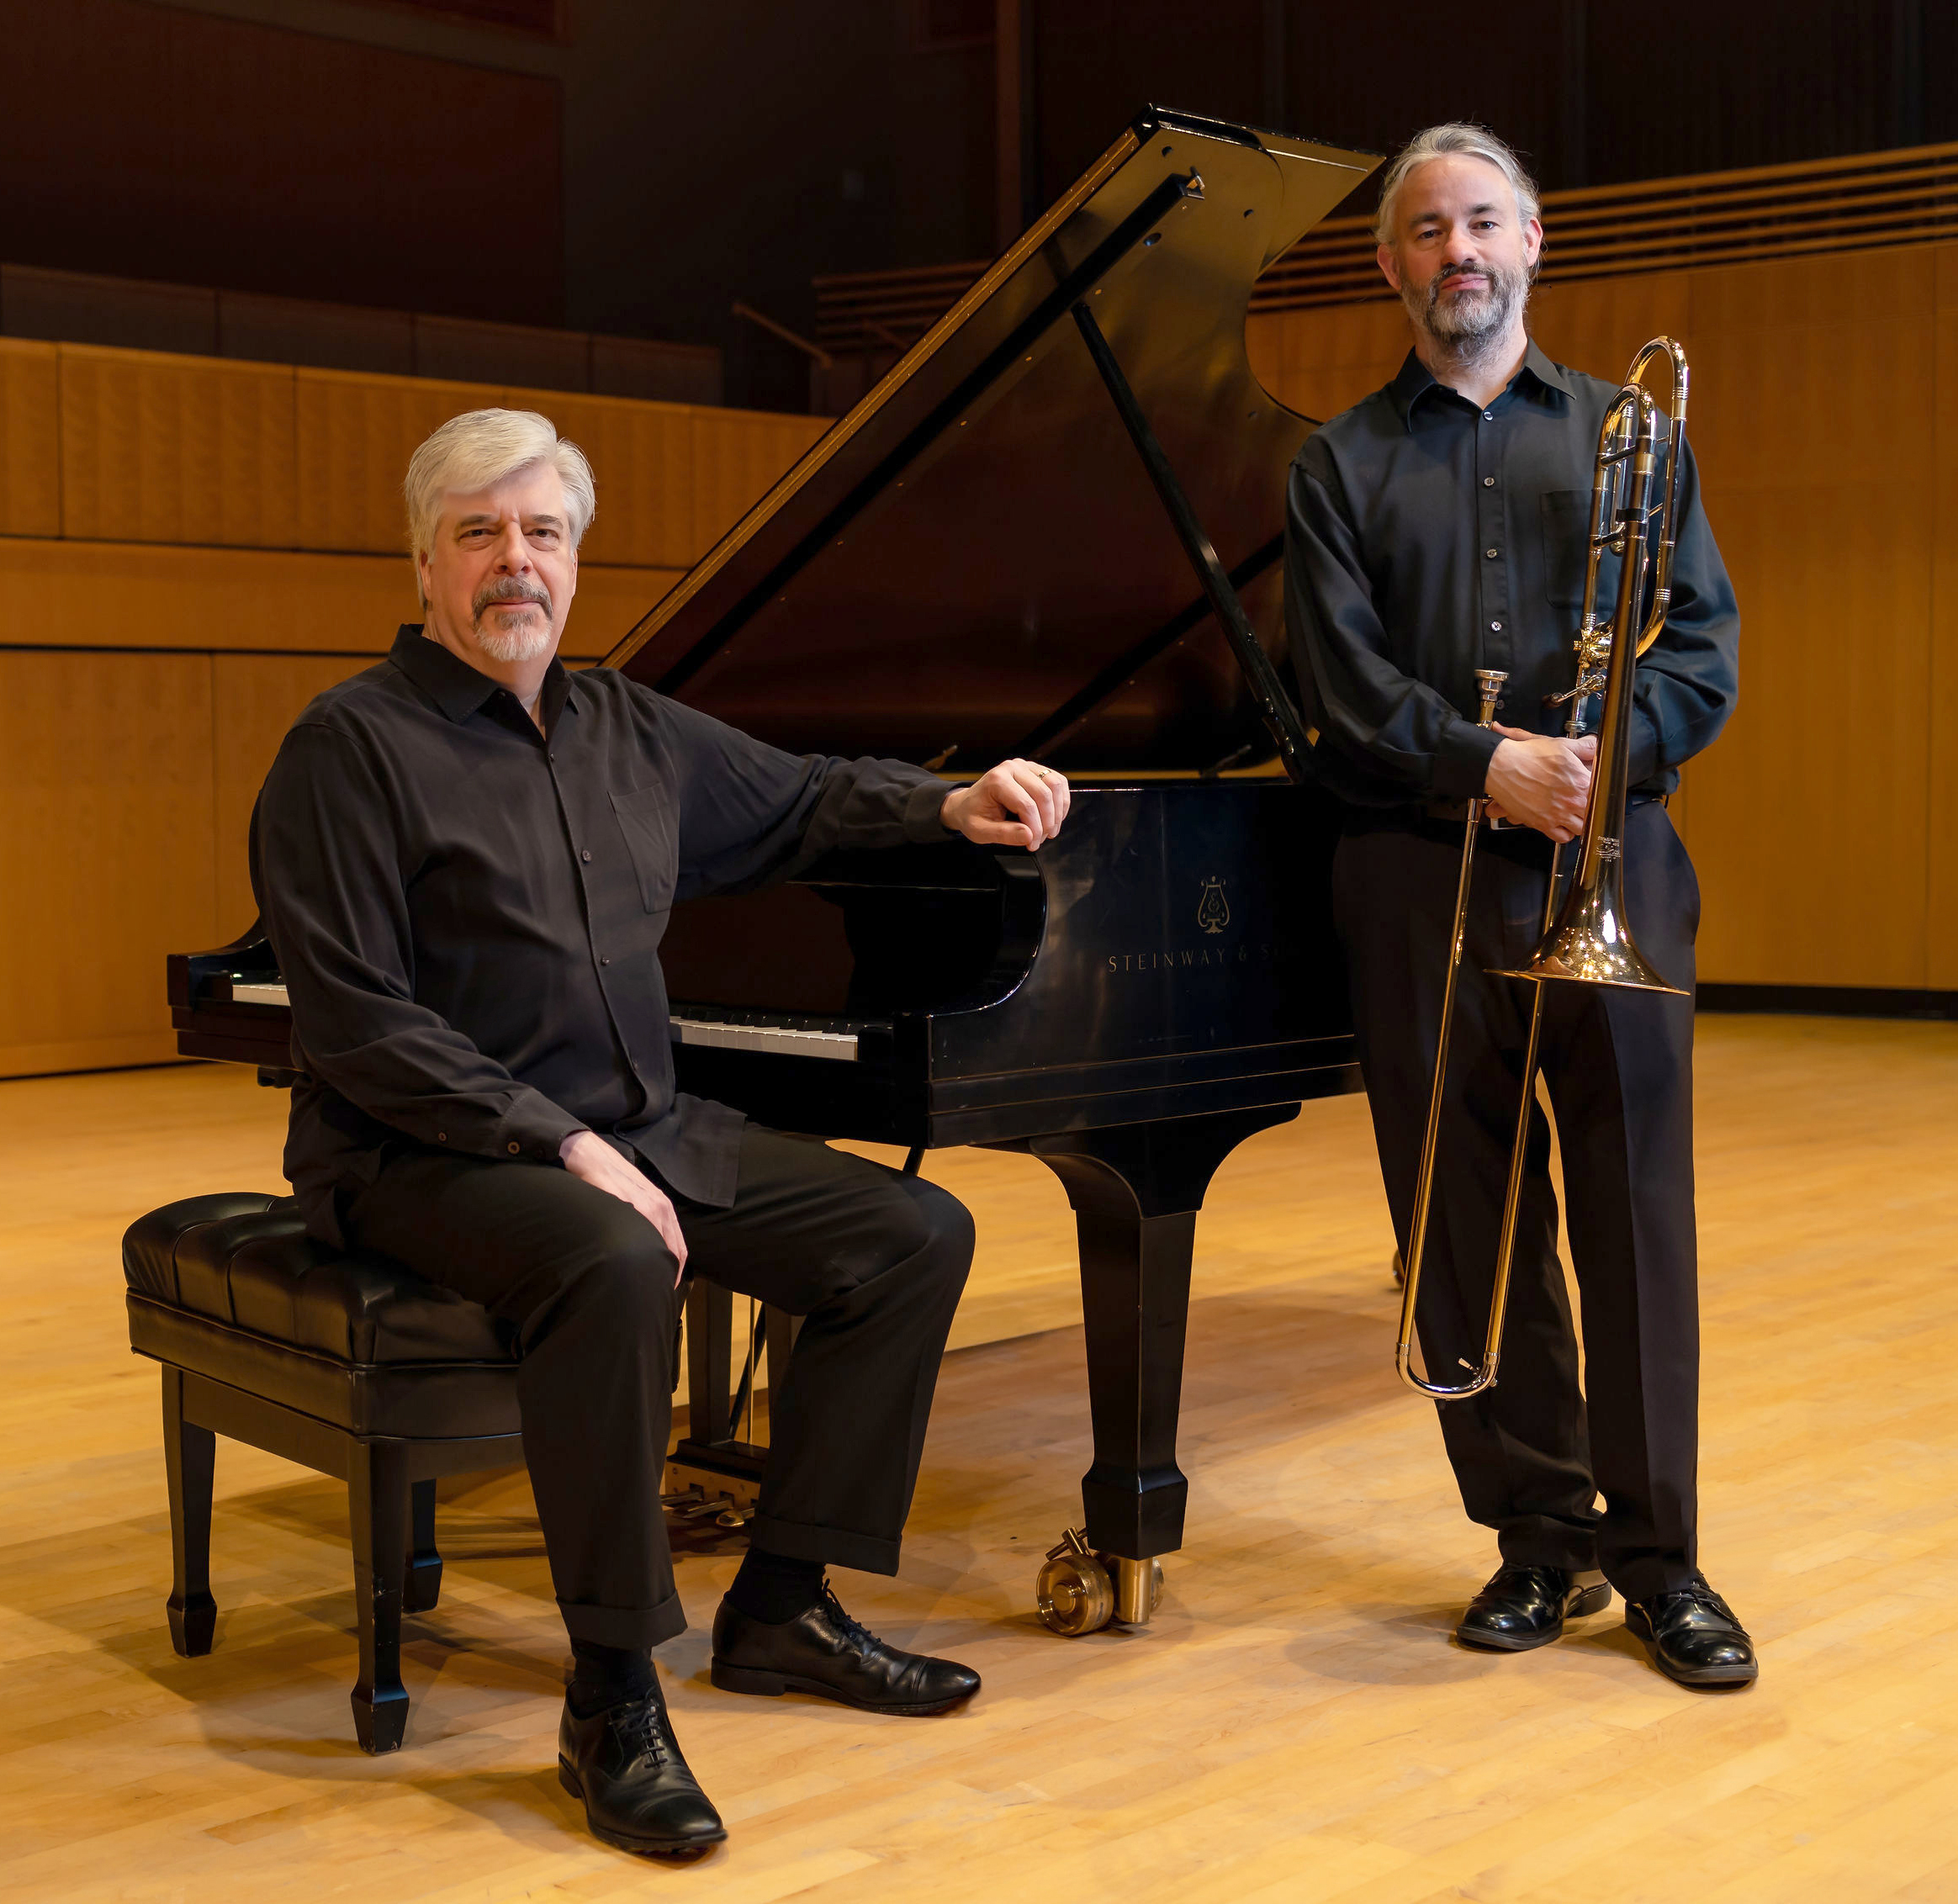 On a concert stage, two white men with gray hair and beards, the left one sitting at a piano the second standing and holding a trombone